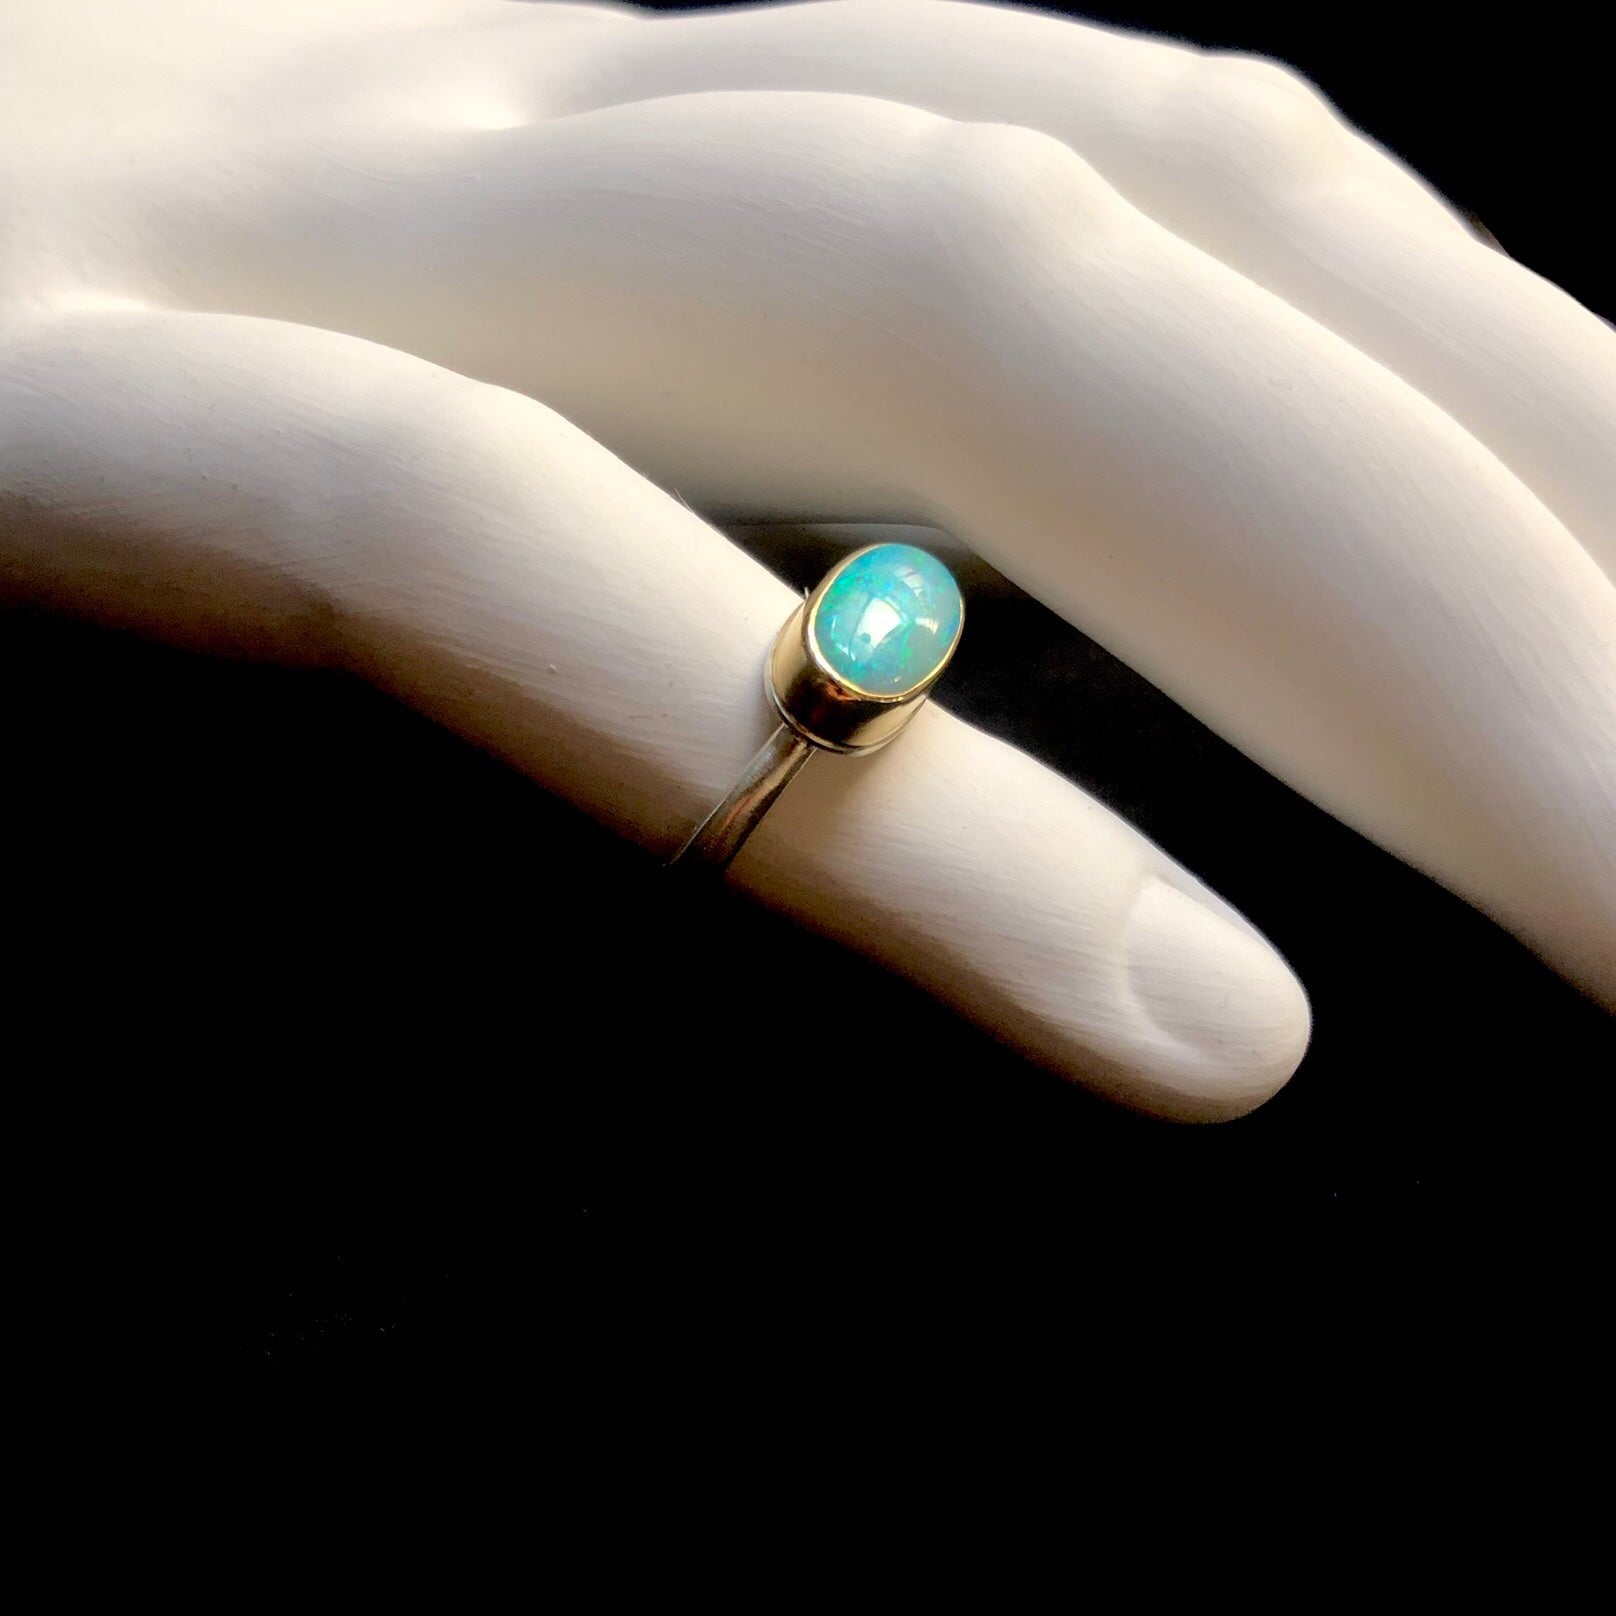 Side profile view of smooth greenish blue stone ring with gold setting and silver band shown on white ceramic finger